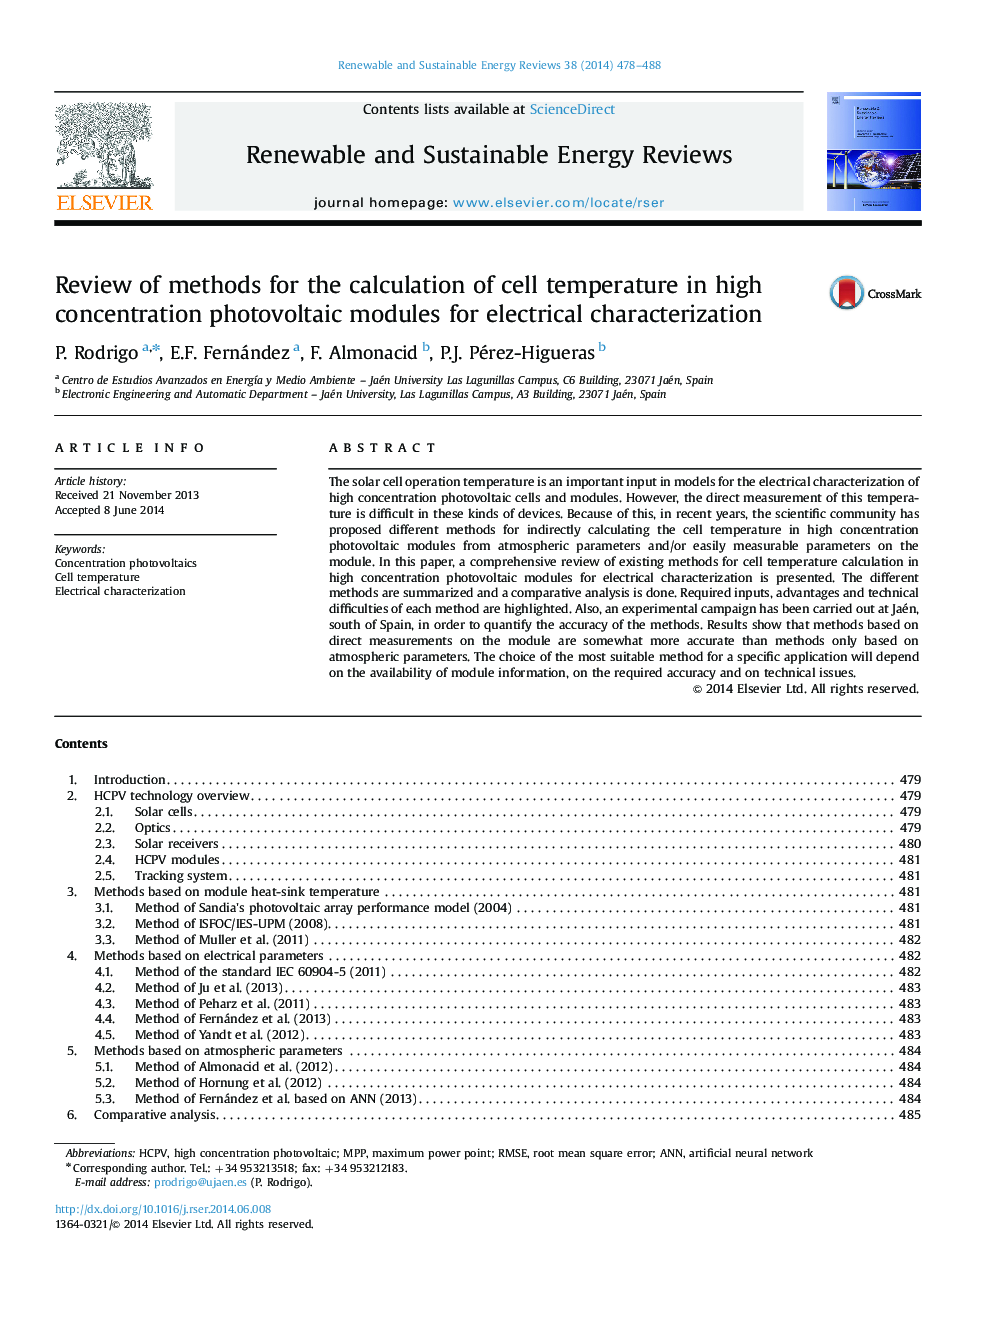 Review of methods for the calculation of cell temperature in high concentration photovoltaic modules for electrical characterization